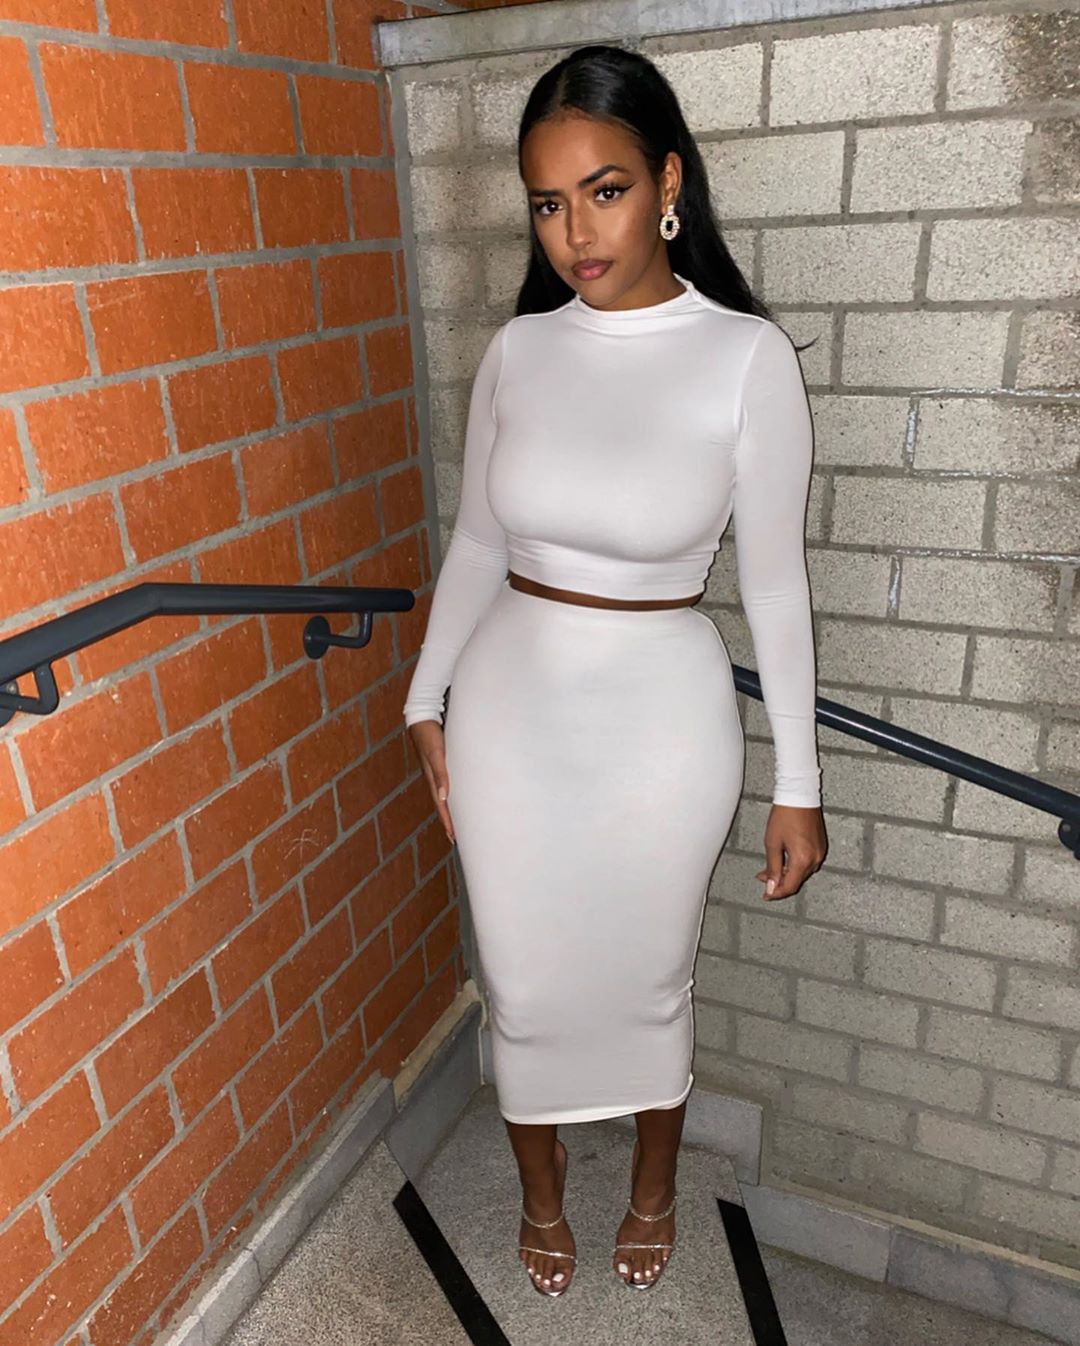 white outfits for women with cocktail dress, outfit designs: Cocktail Dresses,  Crop top,  White Dress,  Pencil skirt,  White Cocktail Dress  